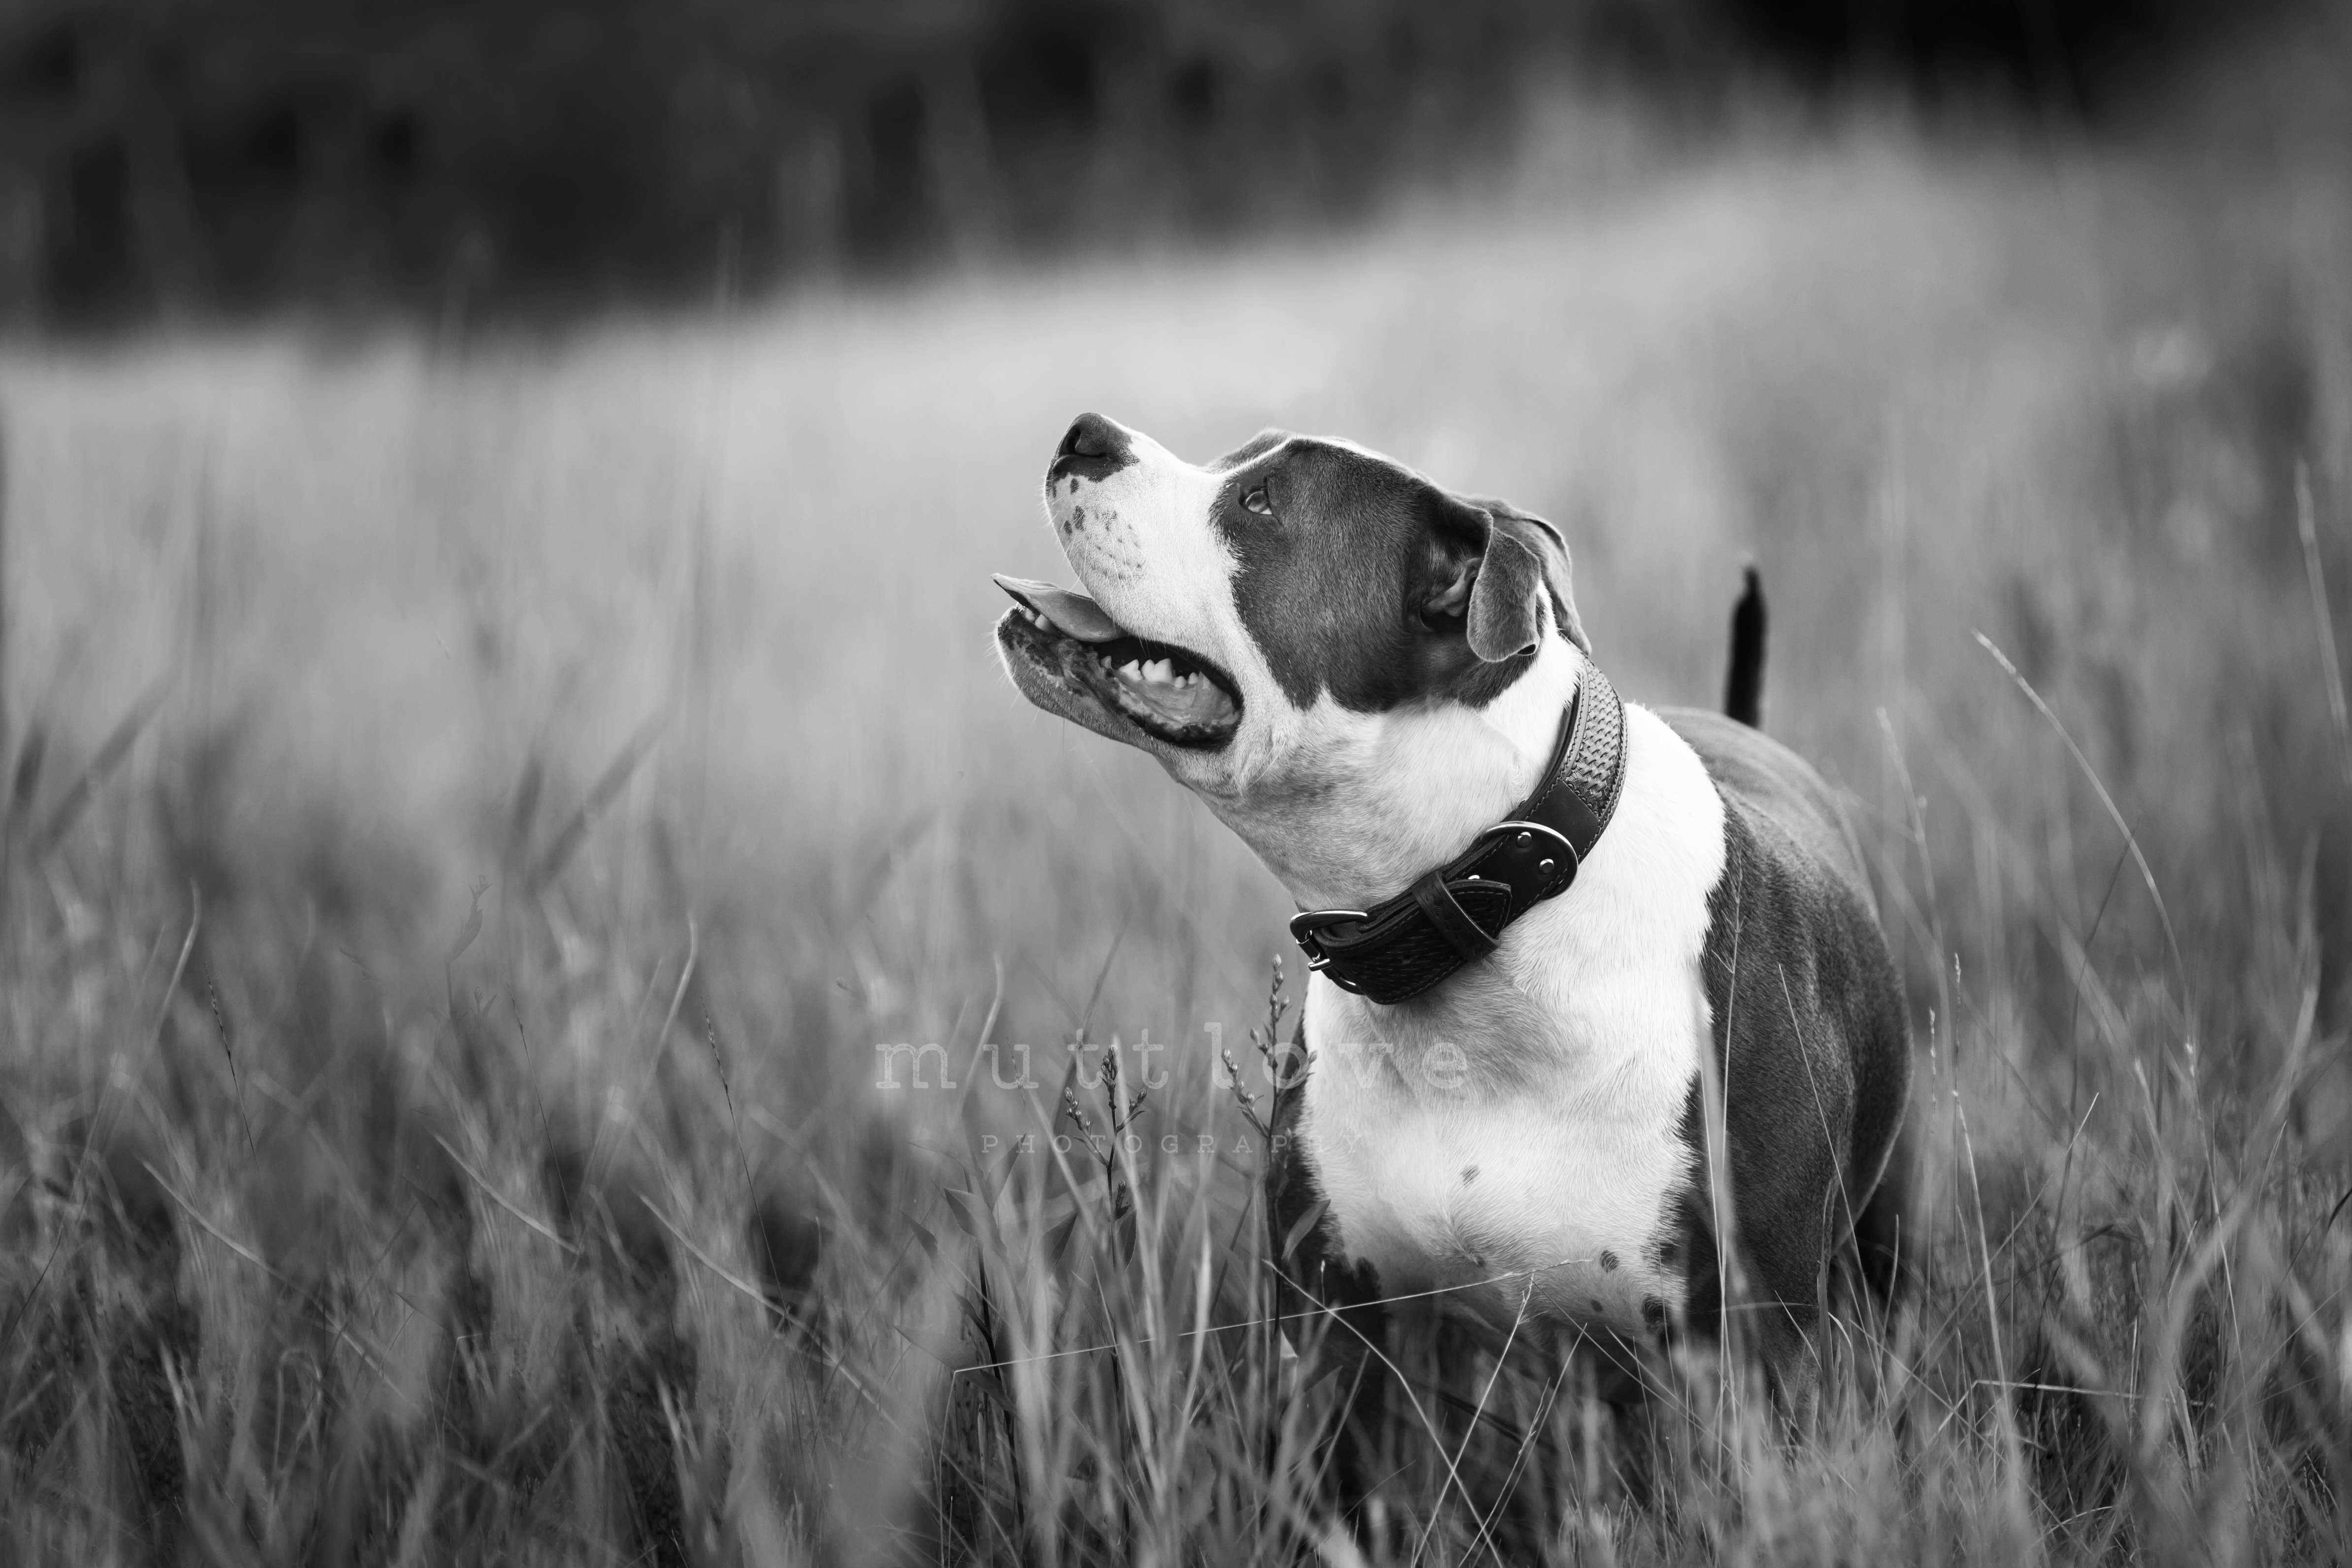 dog in black and white